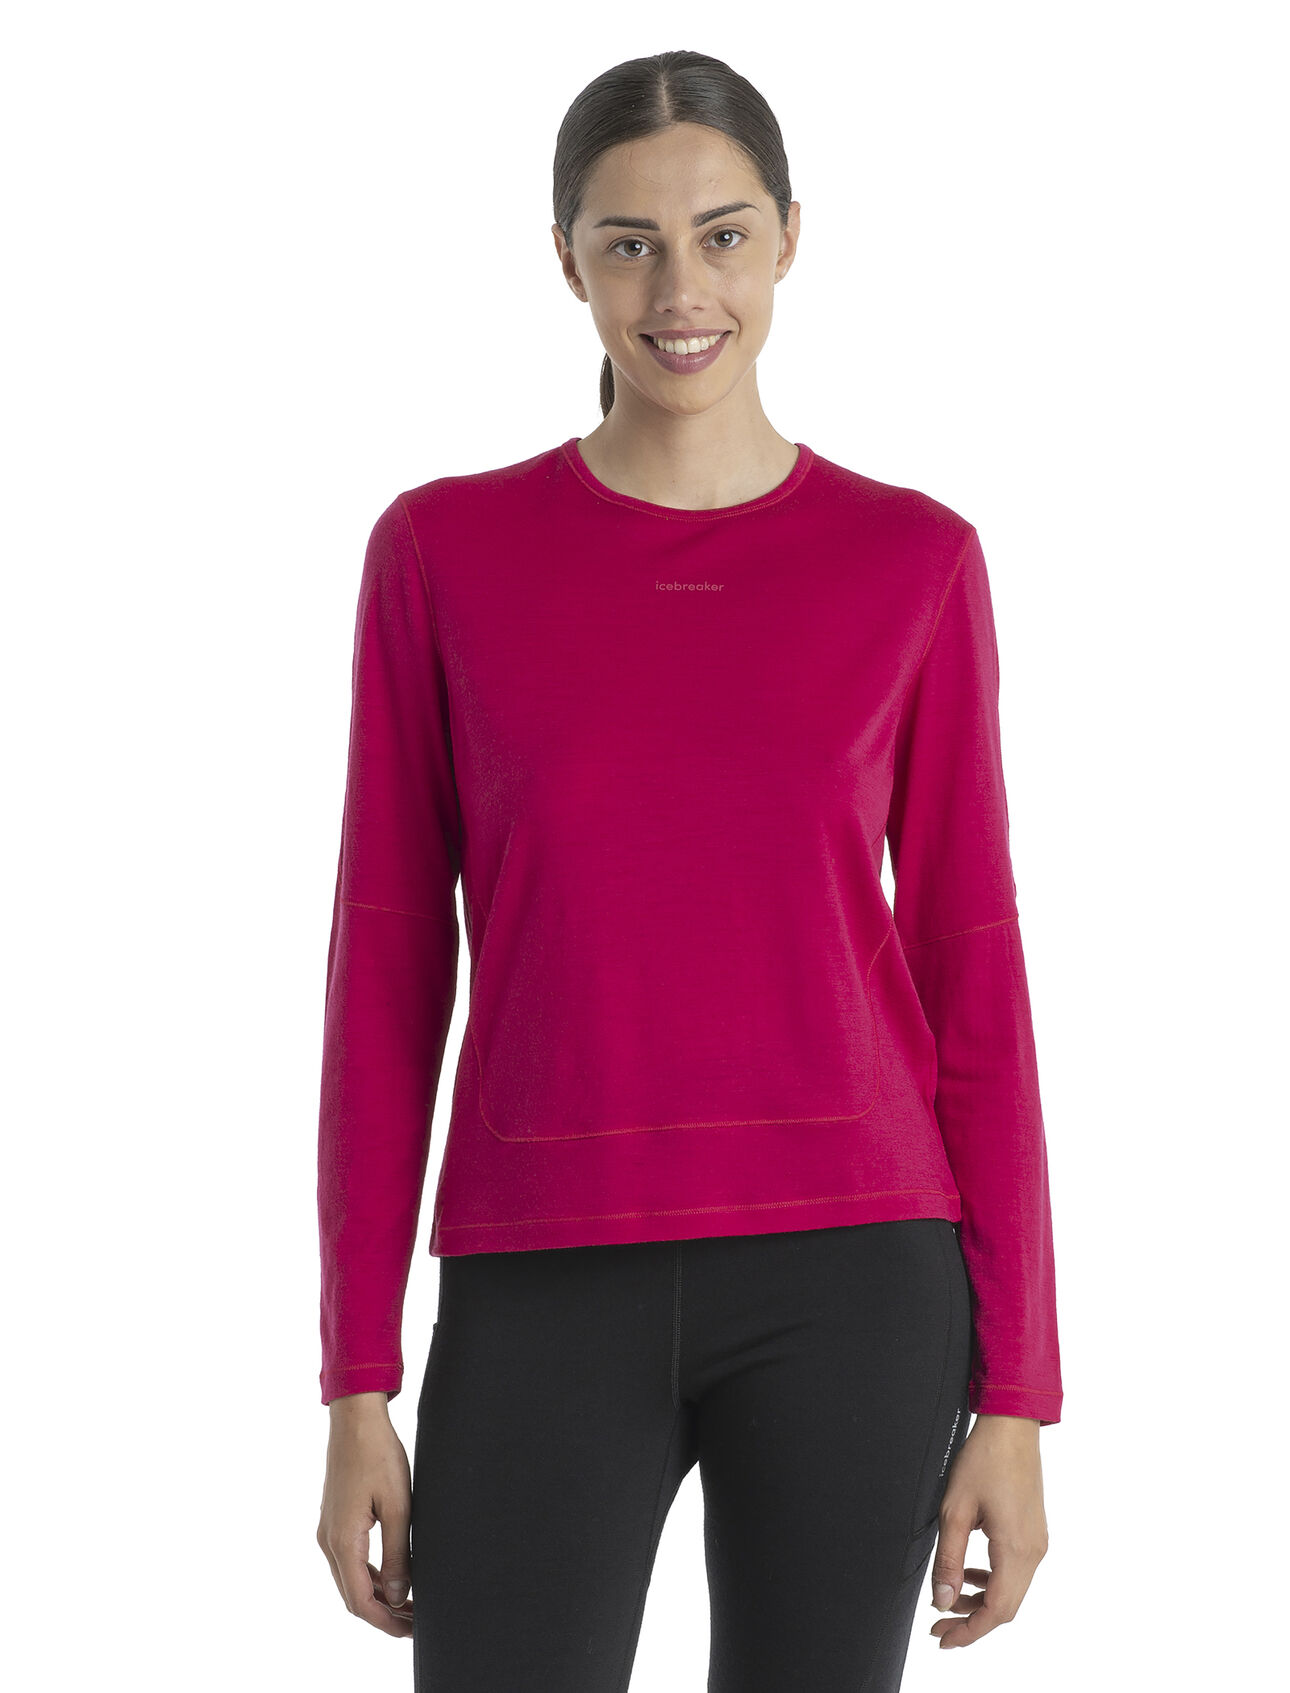 Womens 200 ZoneKnit™ Merino Energy Wind Long Sleeve T-Shirt A highly breathable midweight top for high-output activities, the 200 ZoneKnit™ Energy Wind Long Sleeve T-Shirt features a body-mapped combination of Cool-Lite merino jersey and ultra-breathable eyelet mesh to help keep you cool.